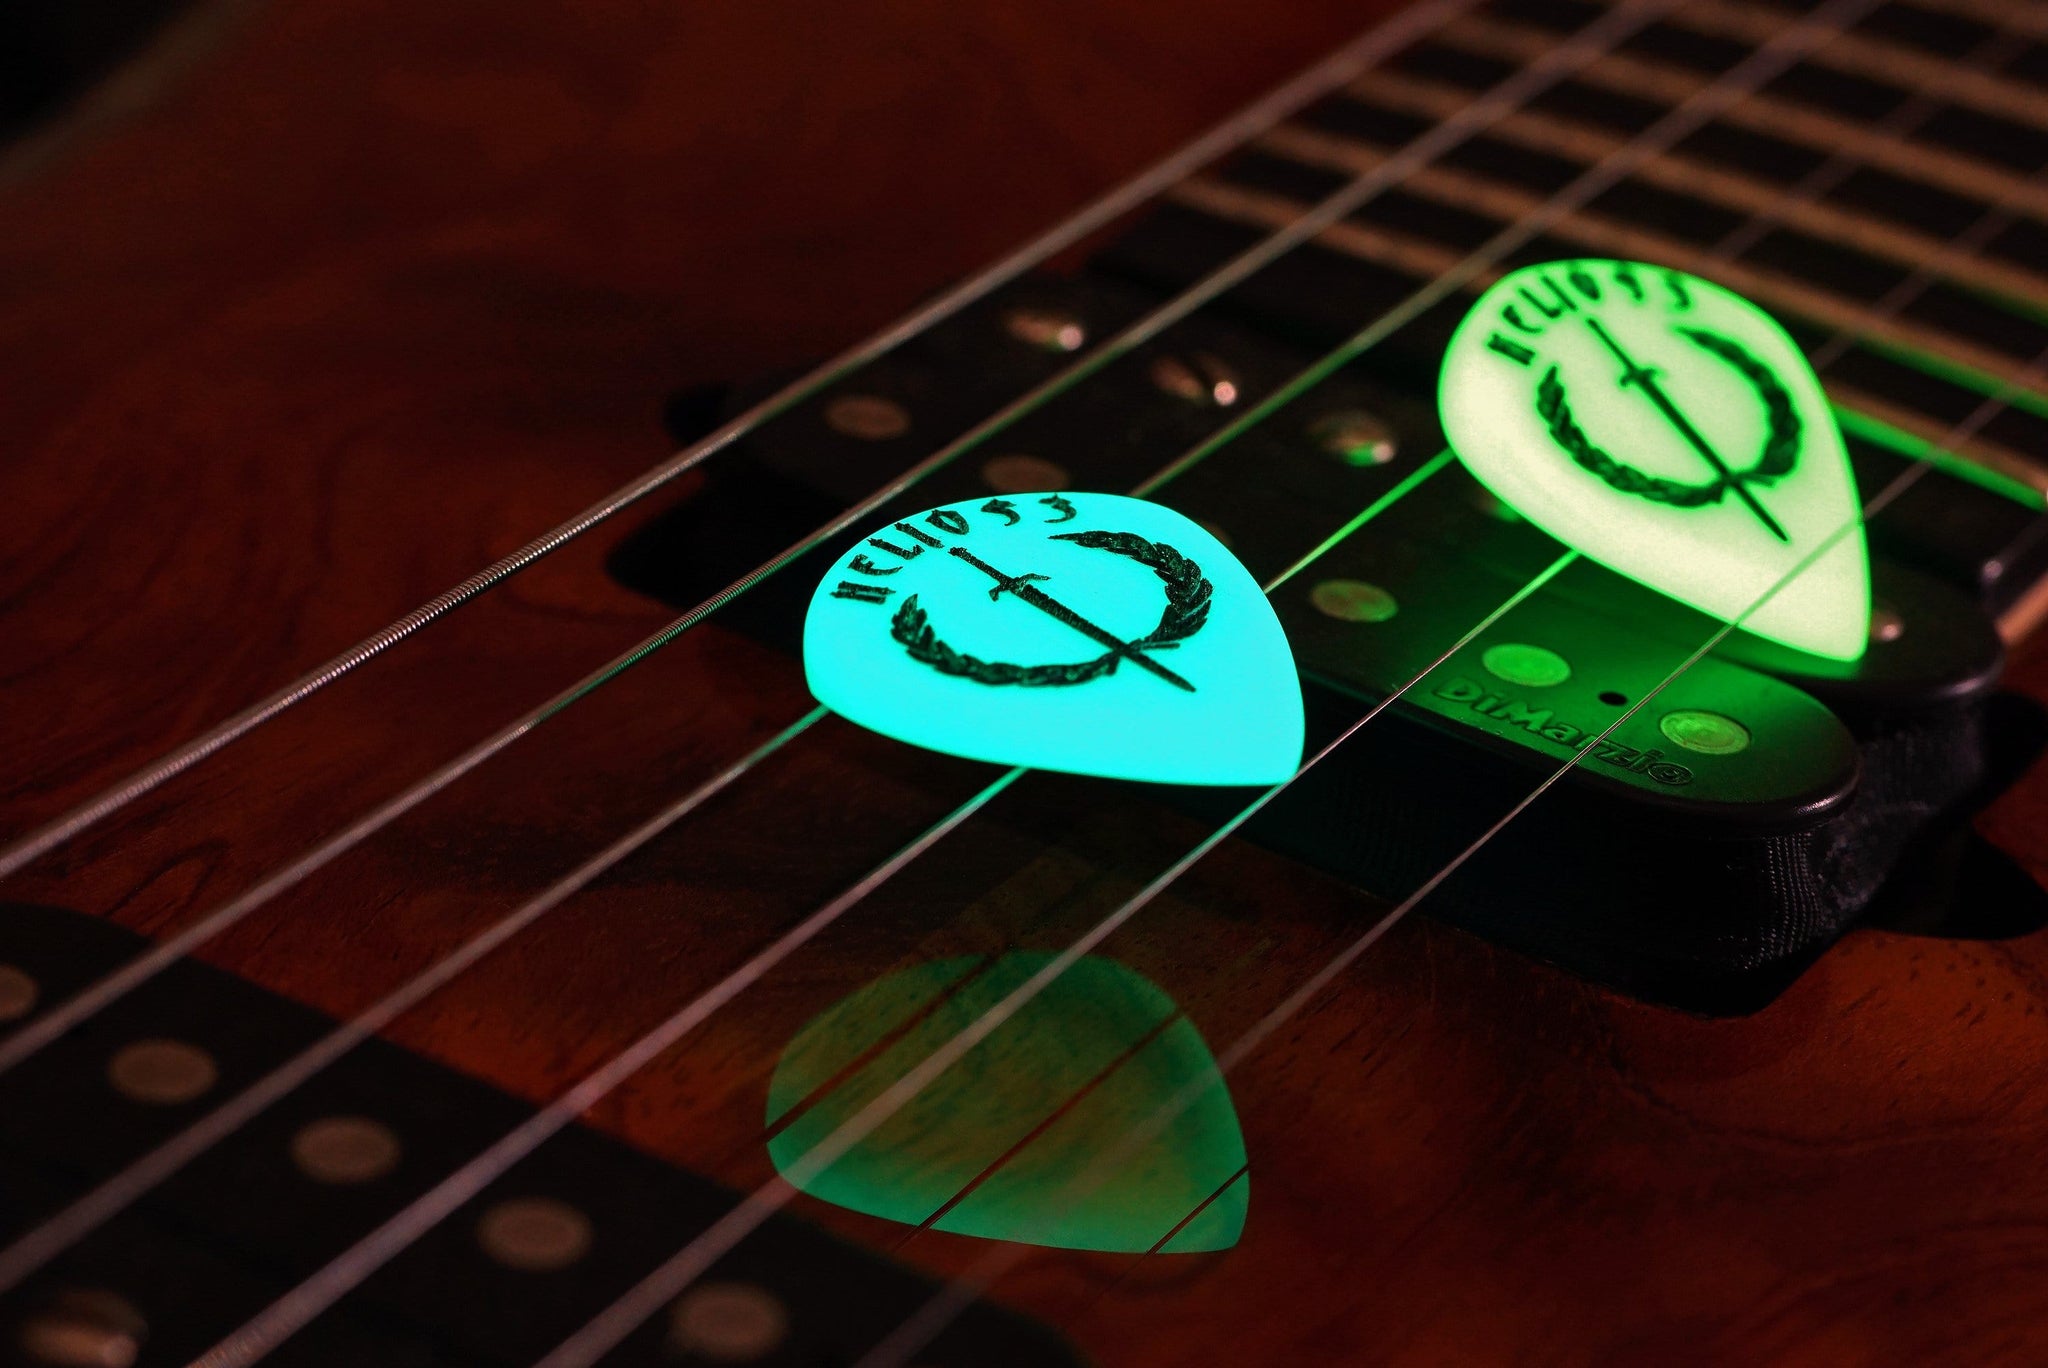 Helios-3 Glowing Jazz Pick - Iron Age Guitar Accessories